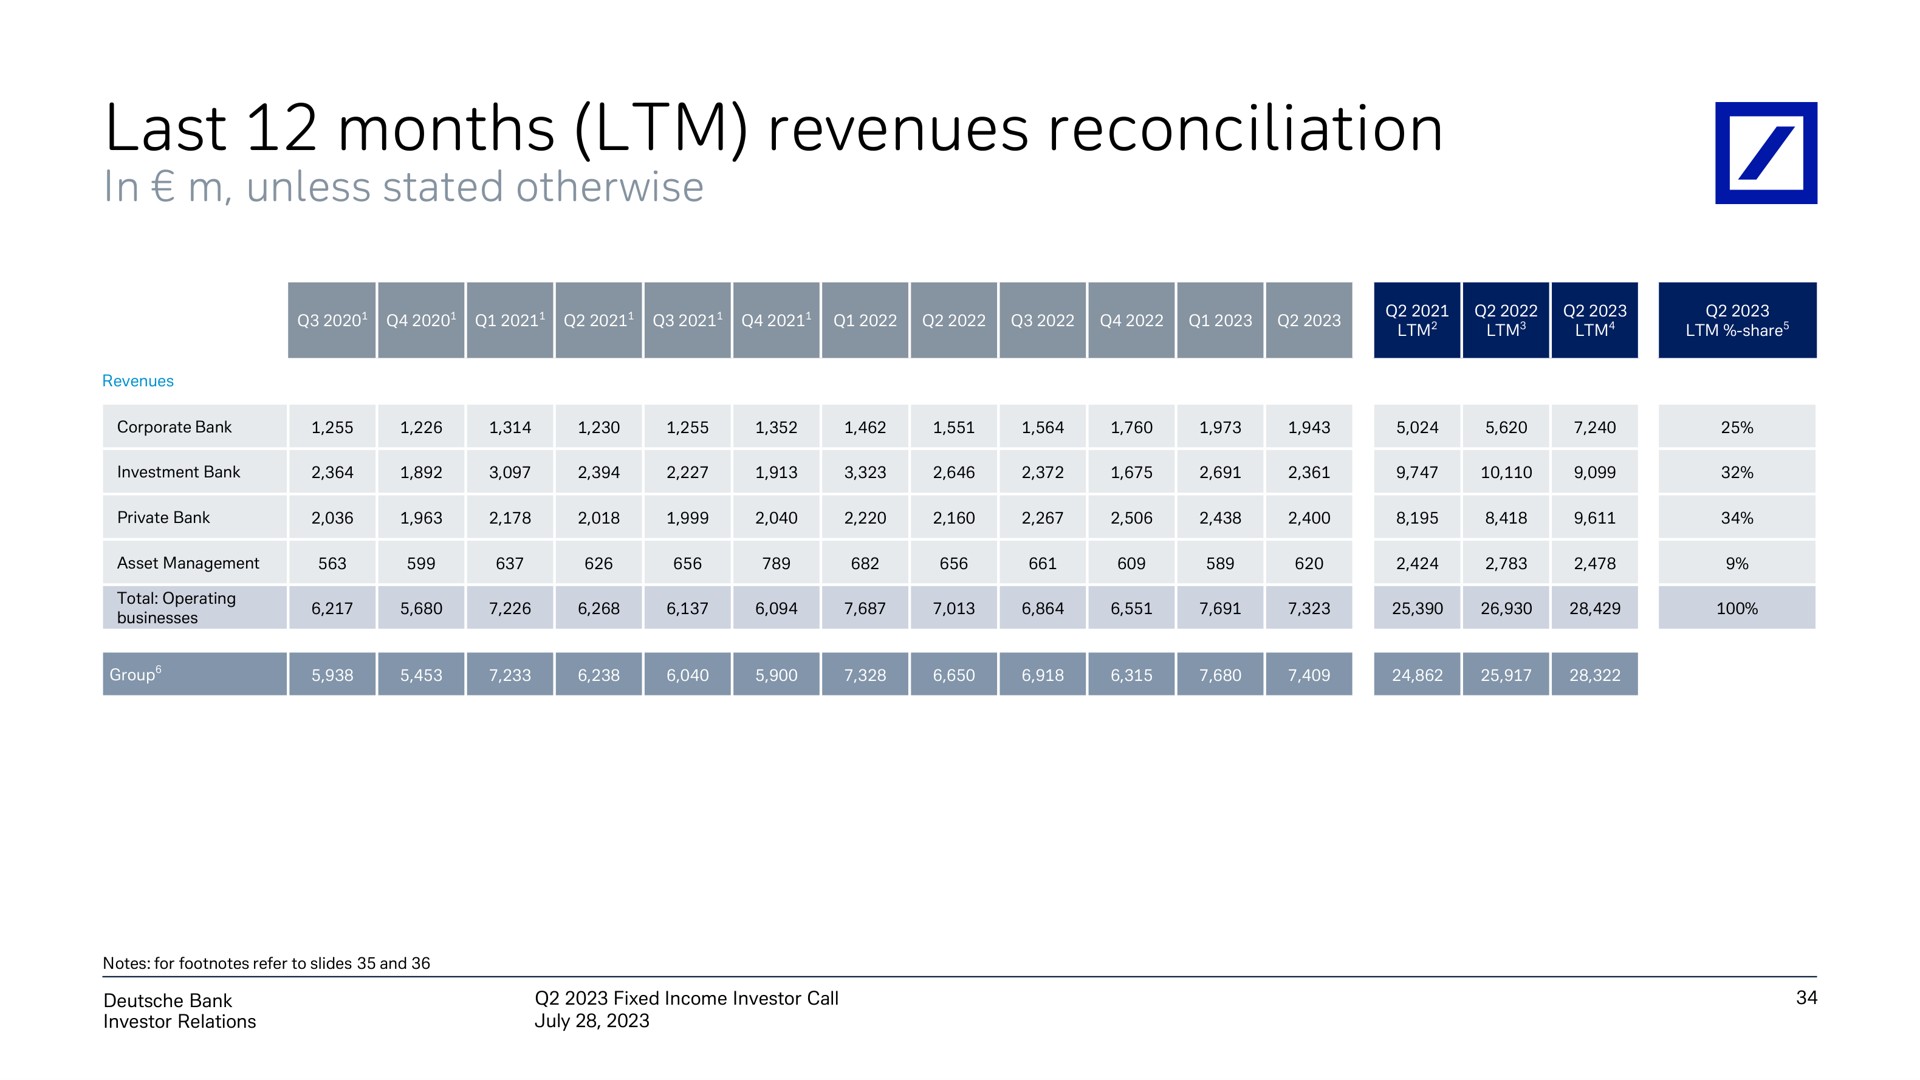 last months revenues reconciliation in unless stated otherwise | Deutsche Bank